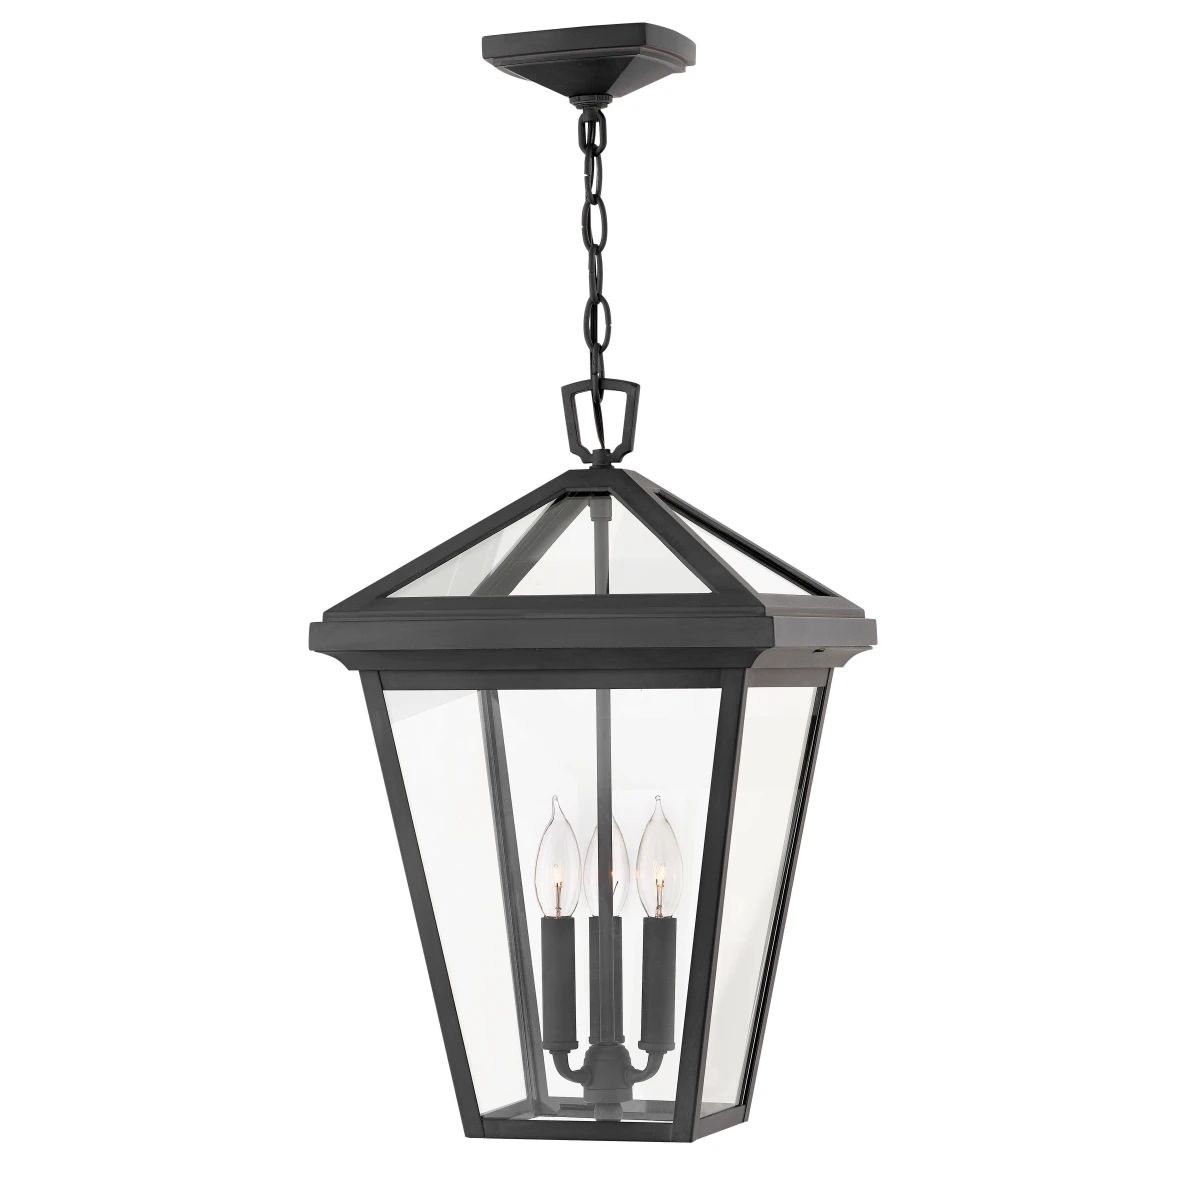 Hinkley Lighting 2562MB Alford Place 3 Light 12" Wide Outdoor Pendant | Build.com, Inc.